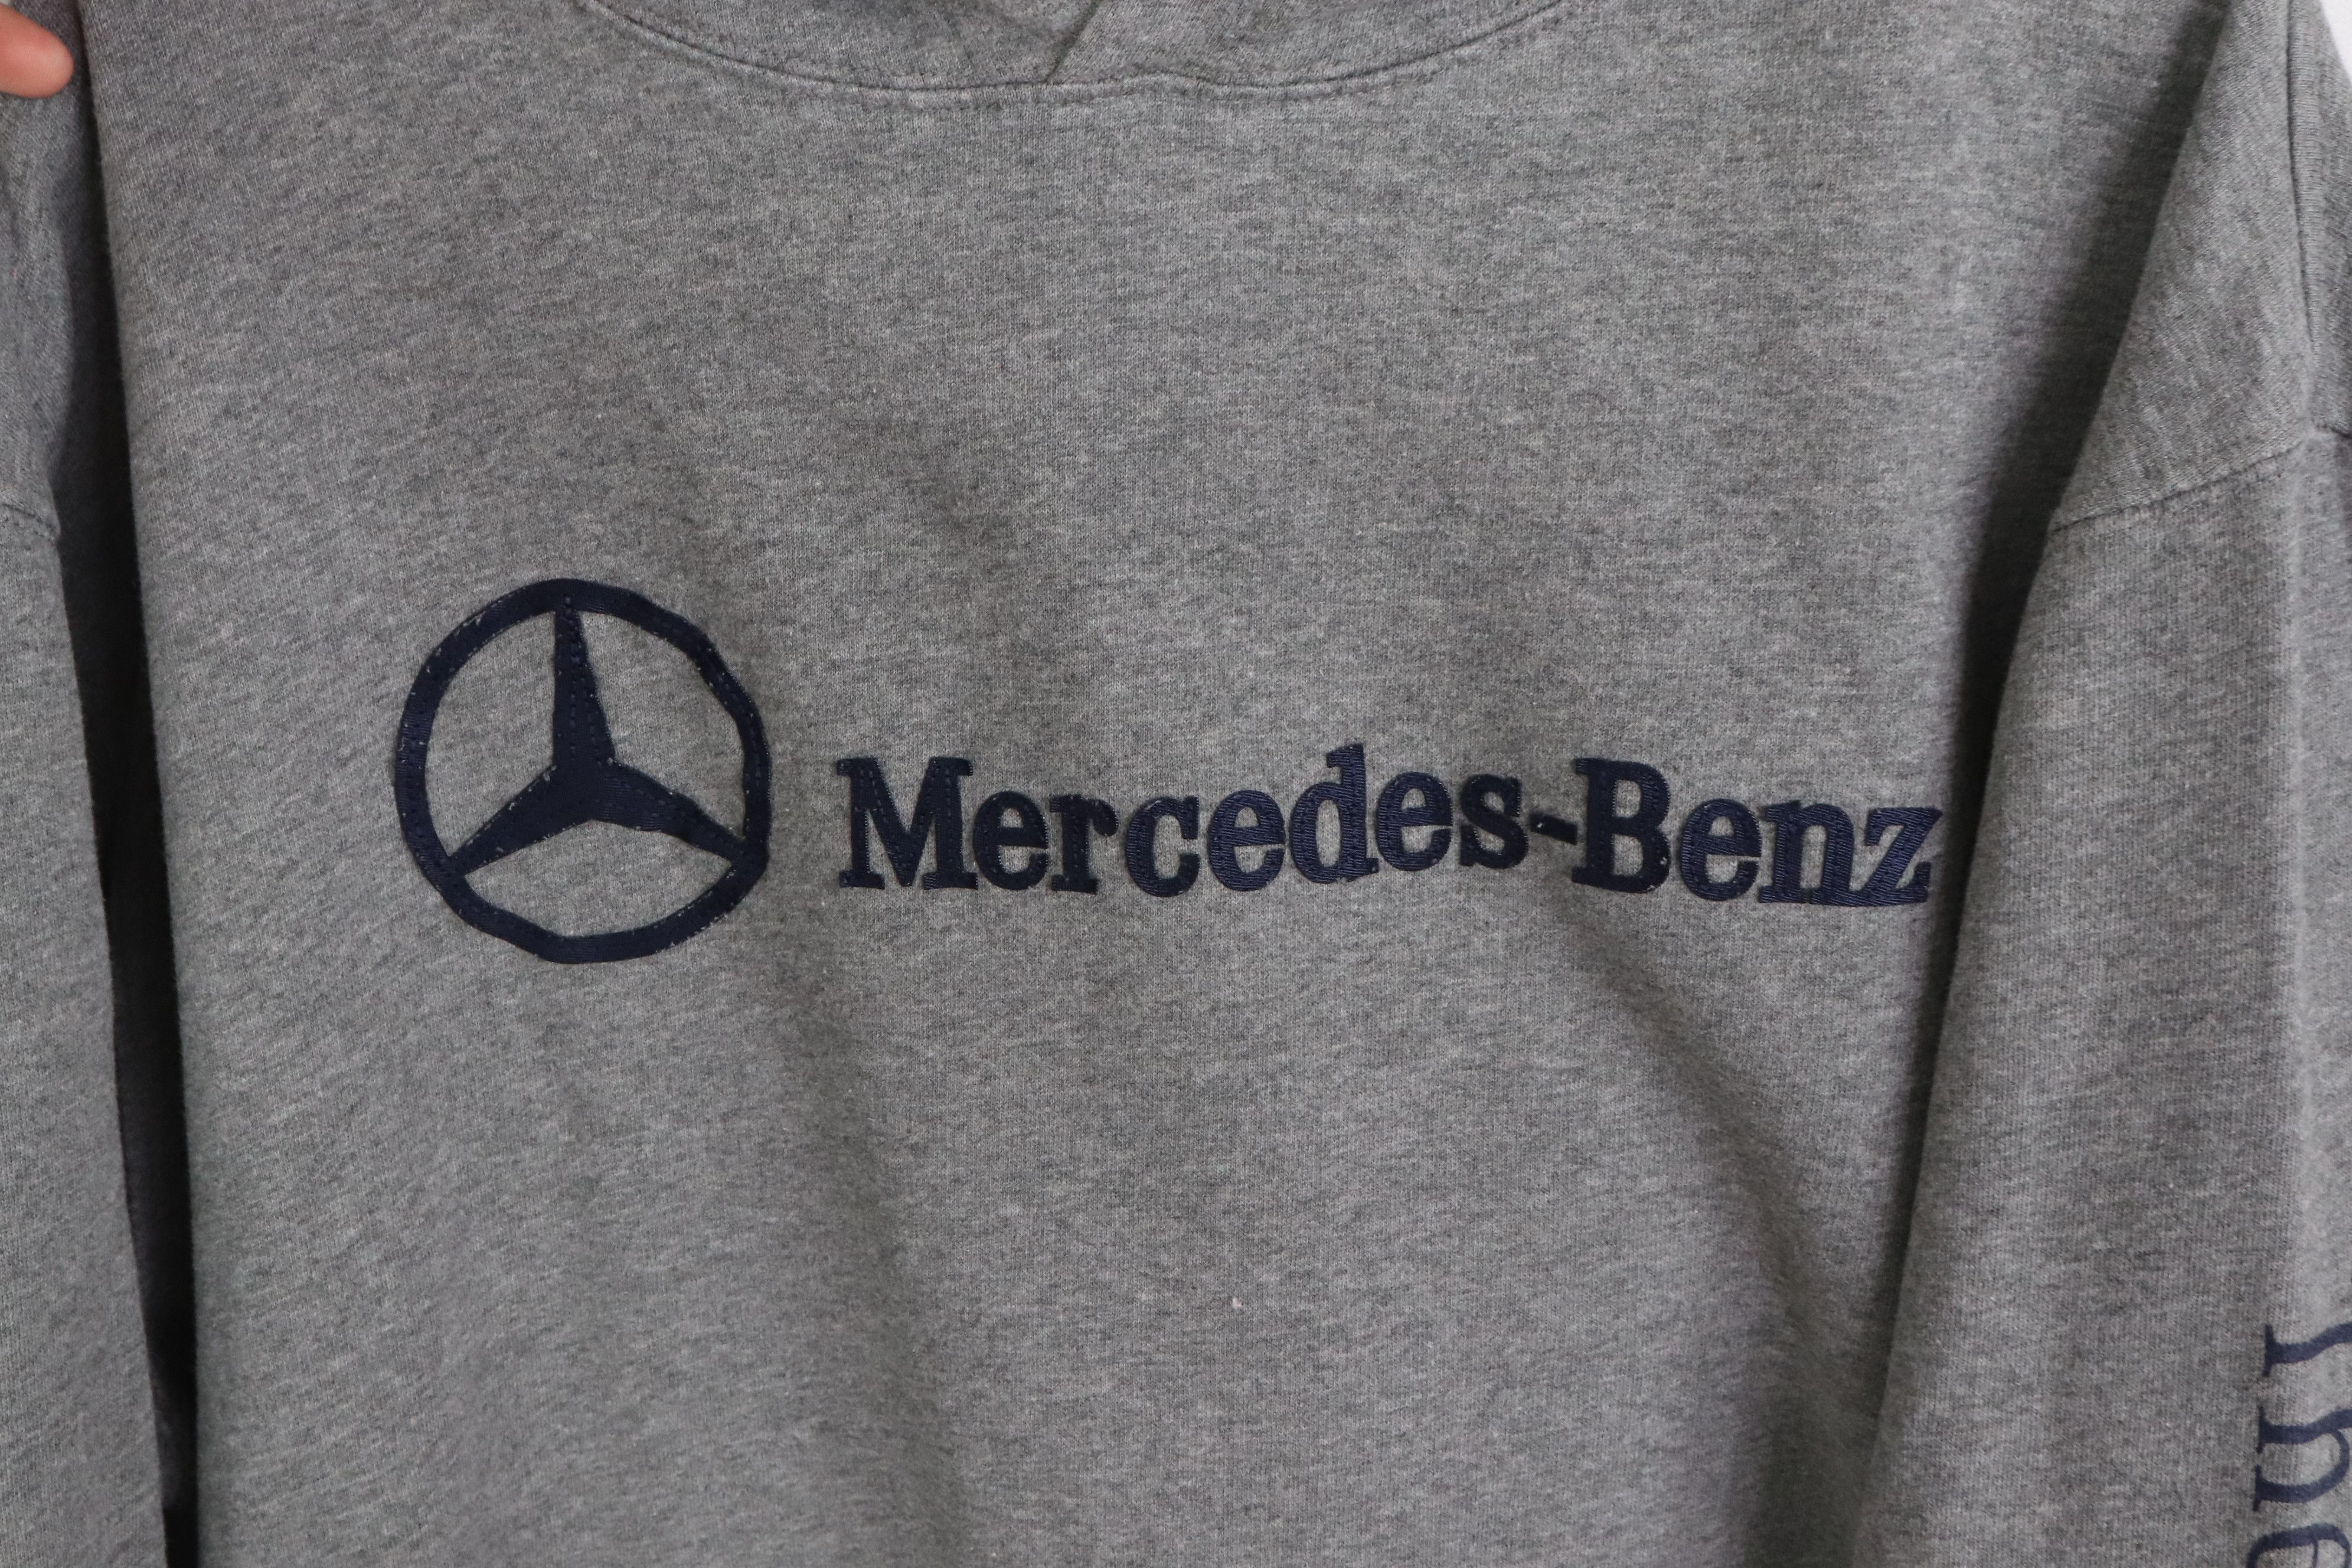 Mercedes Benz Vintage Mercedes Benz Mens XL The Best or Nothing Spell Out Hoodie Sweatshirt Size US XL / EU 56 / 4 - 4 Thumbnail